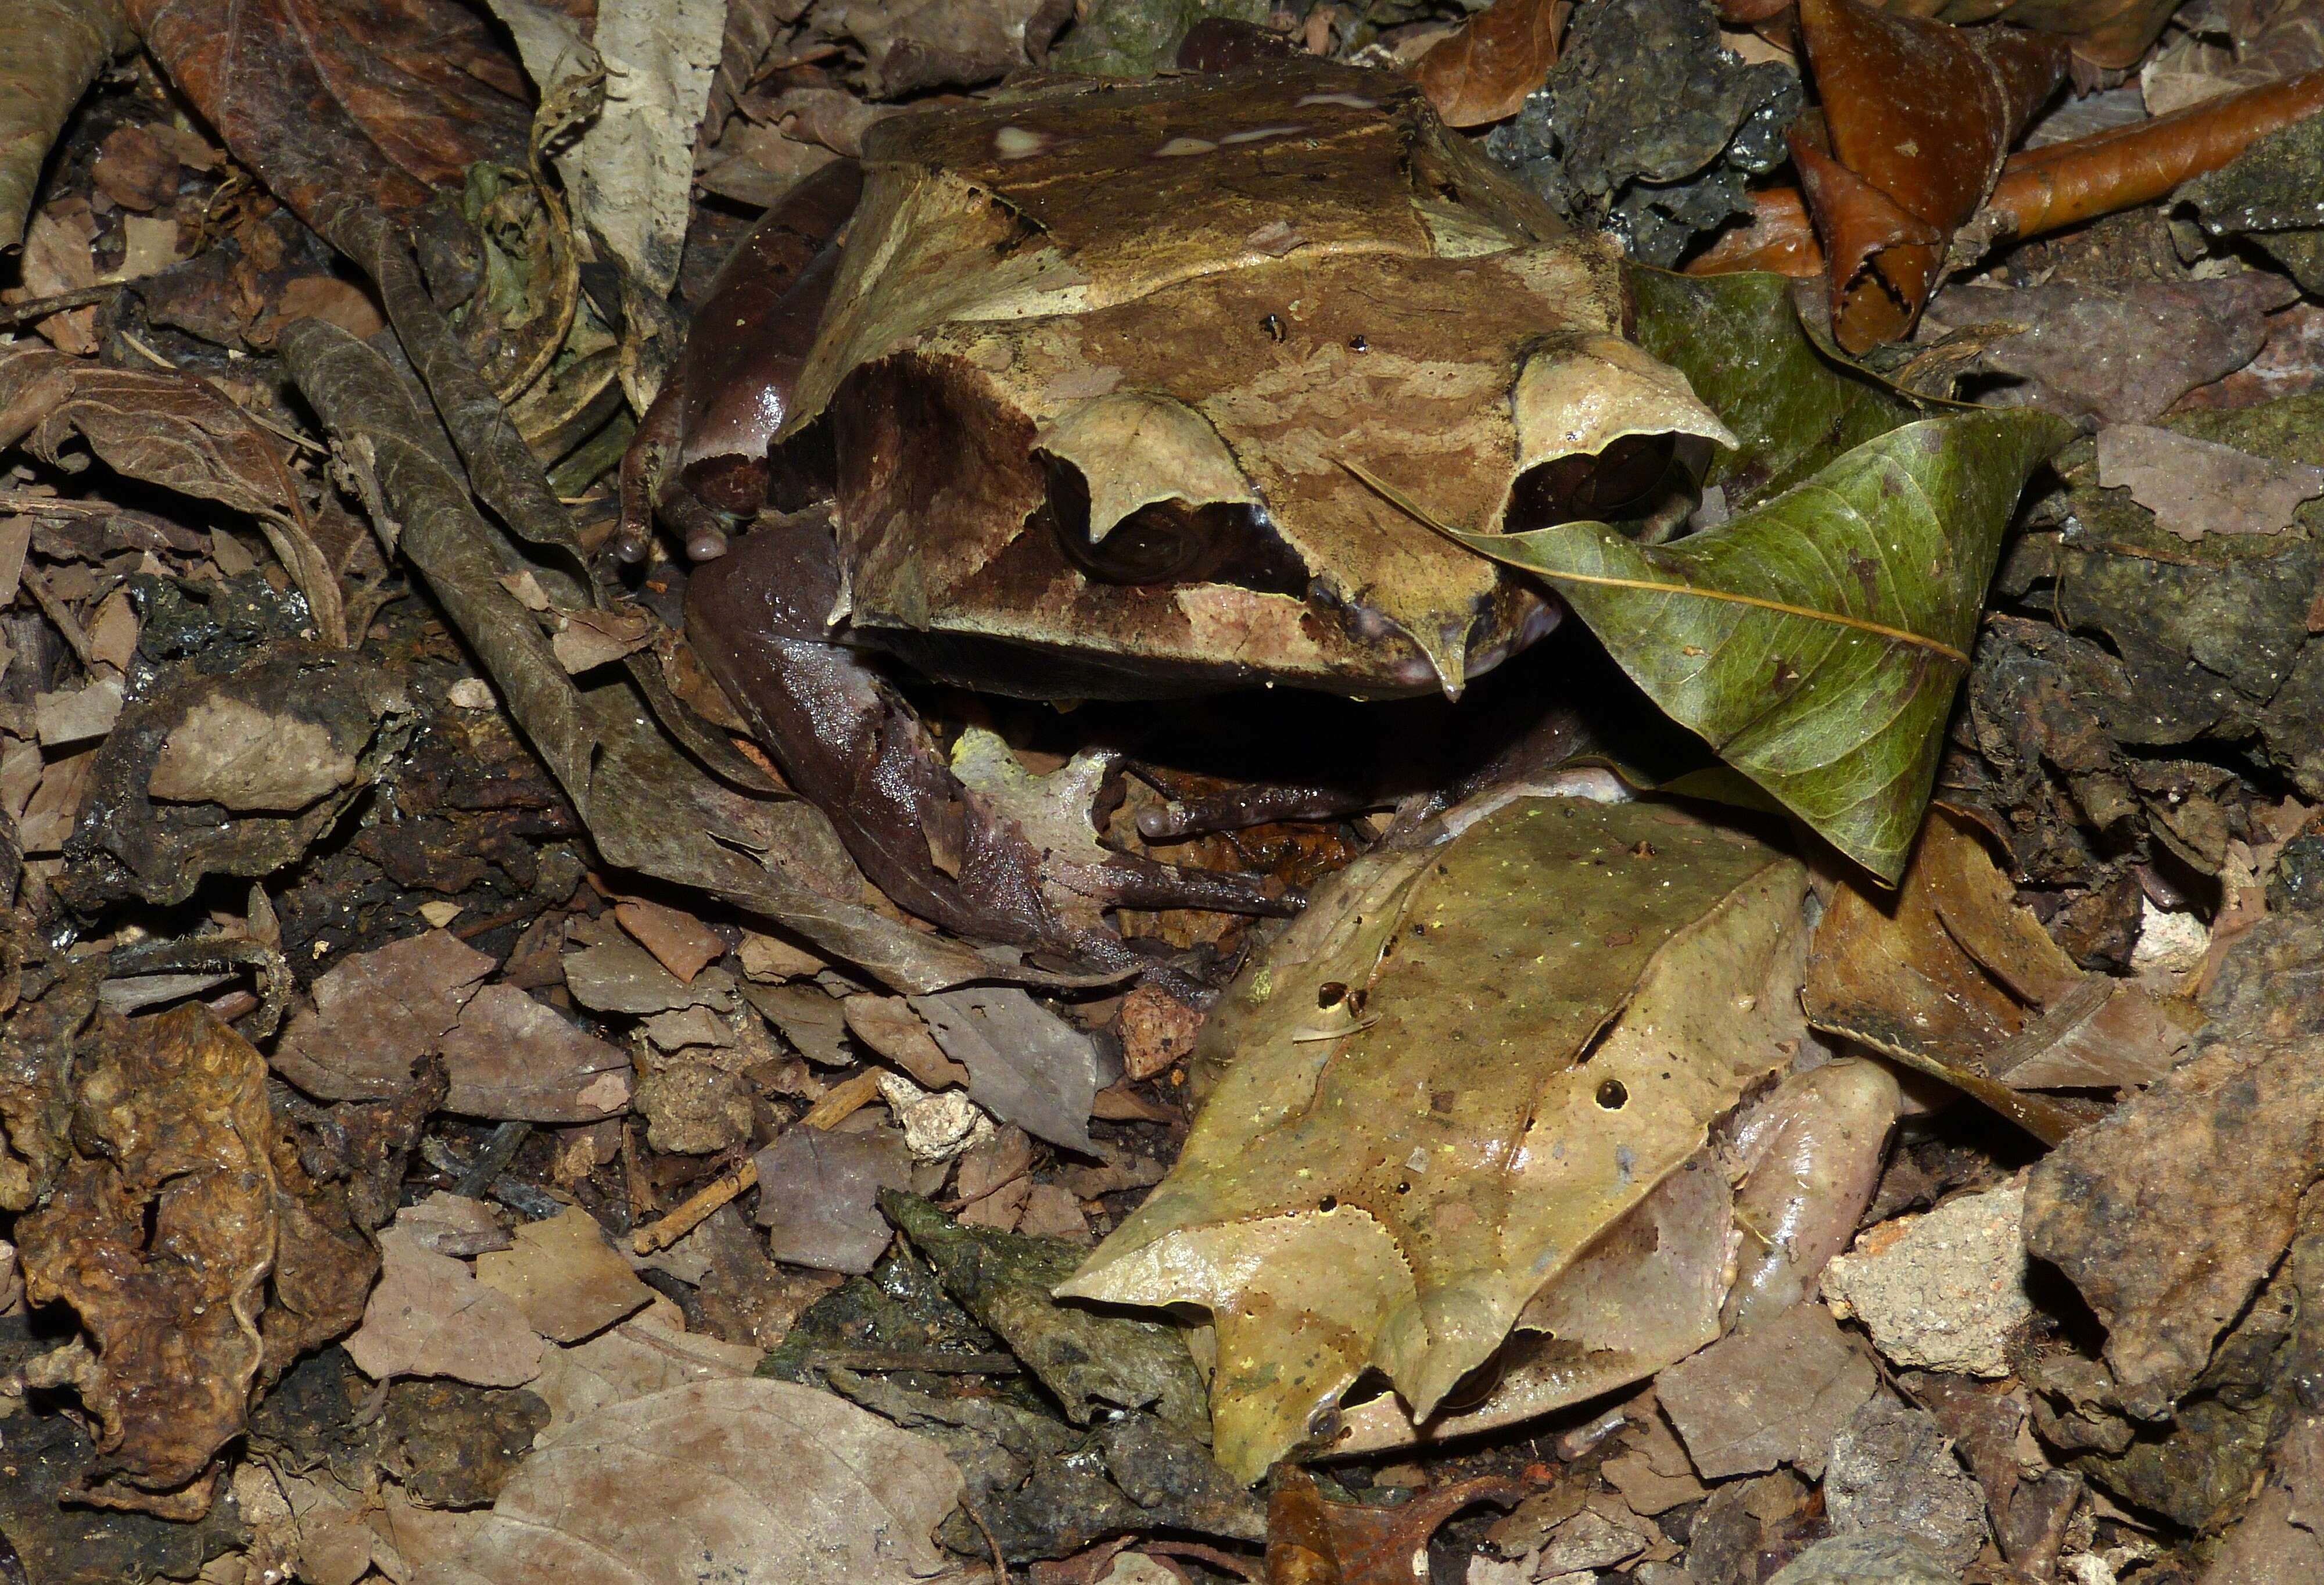 Image of South Asian frogs